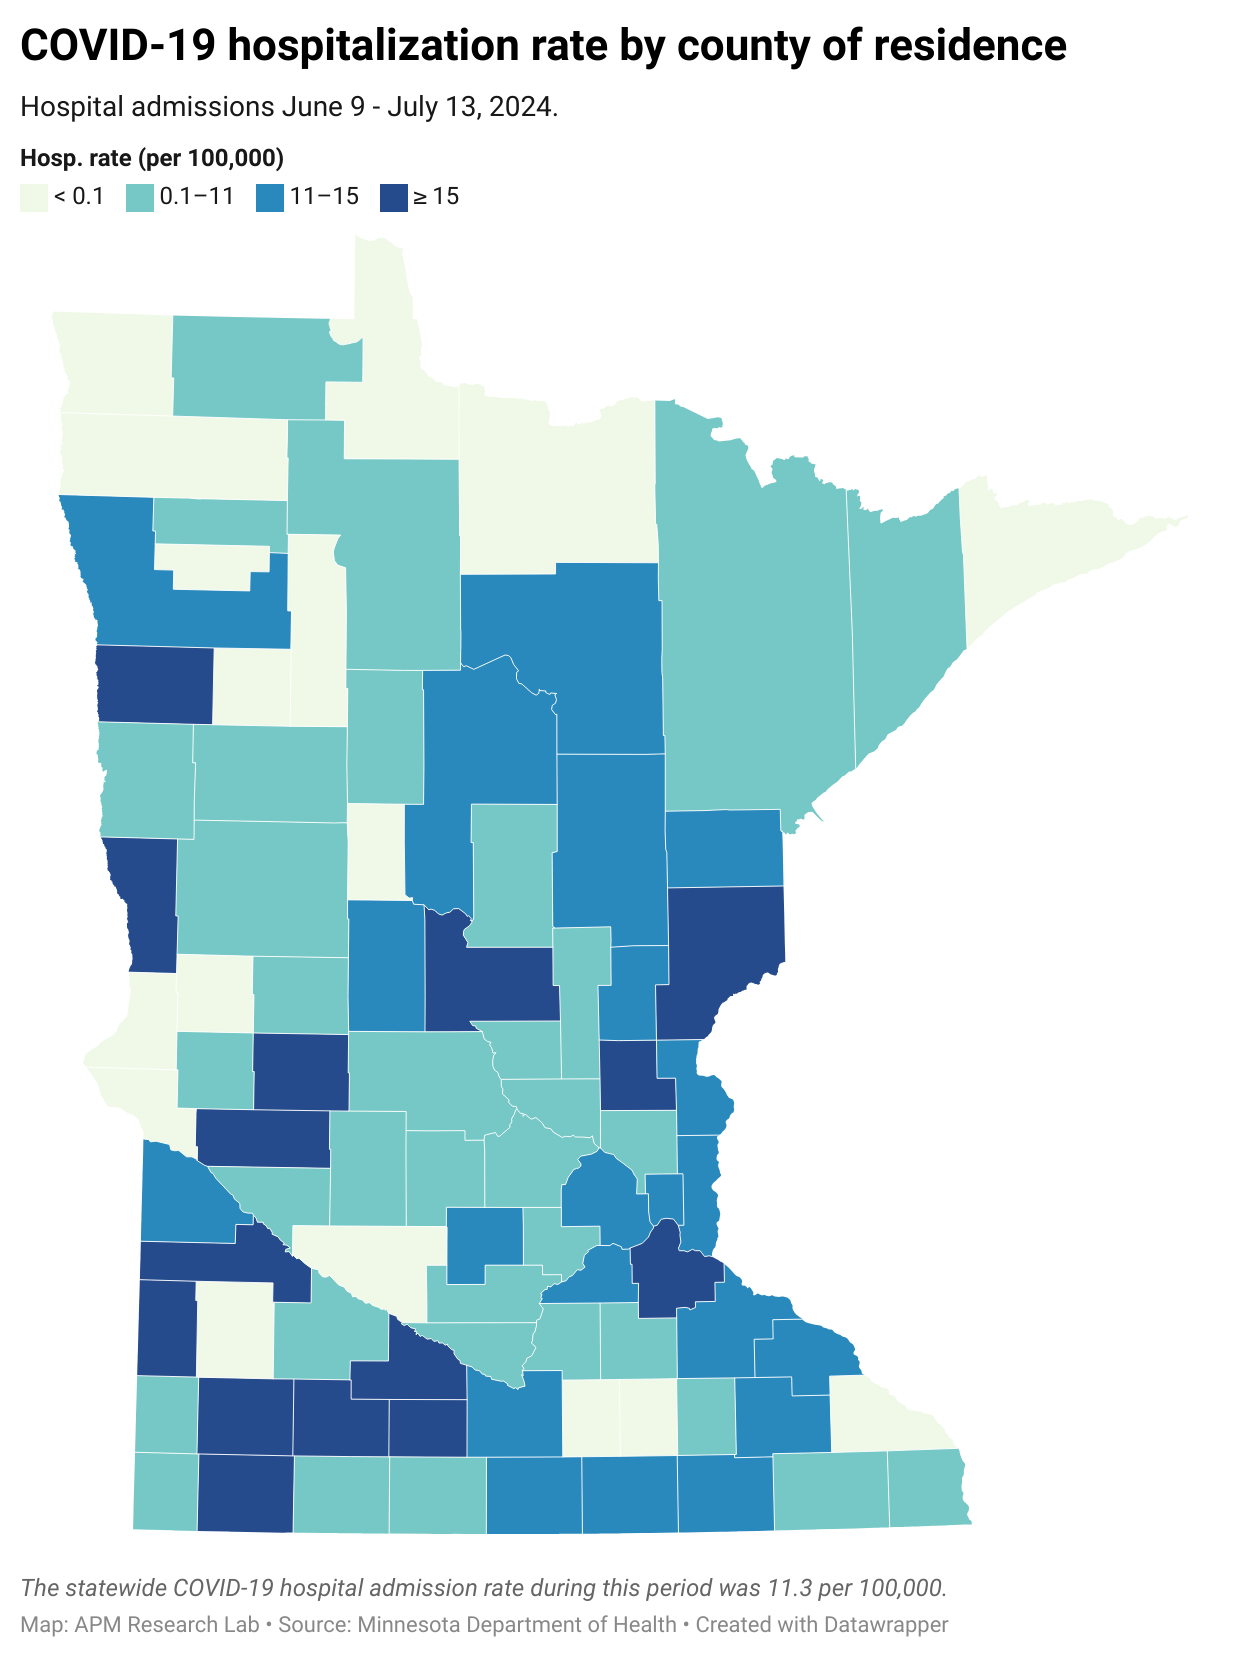 COVID-19 hospitalization rates by county in Minnesota